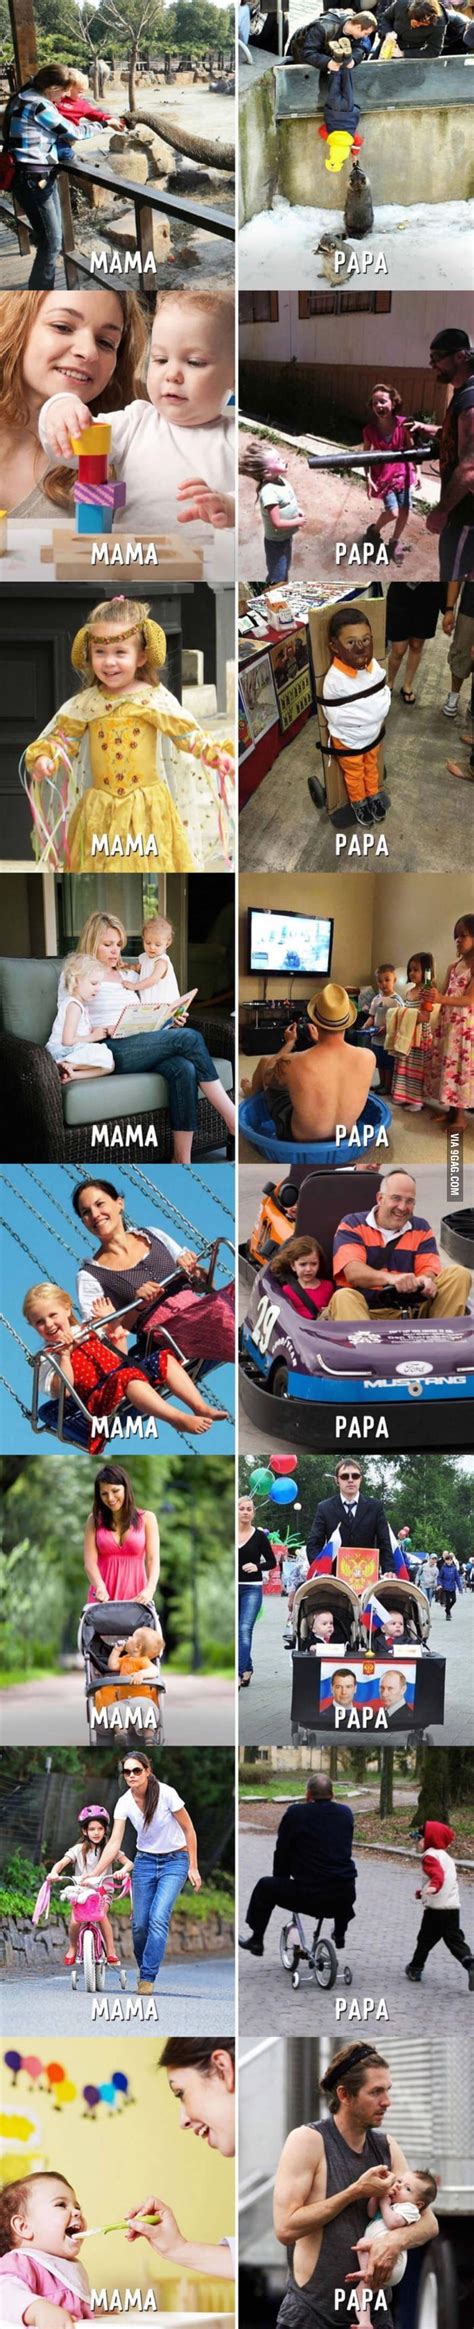 The Difference Between Mama And Papa ~ My Blog